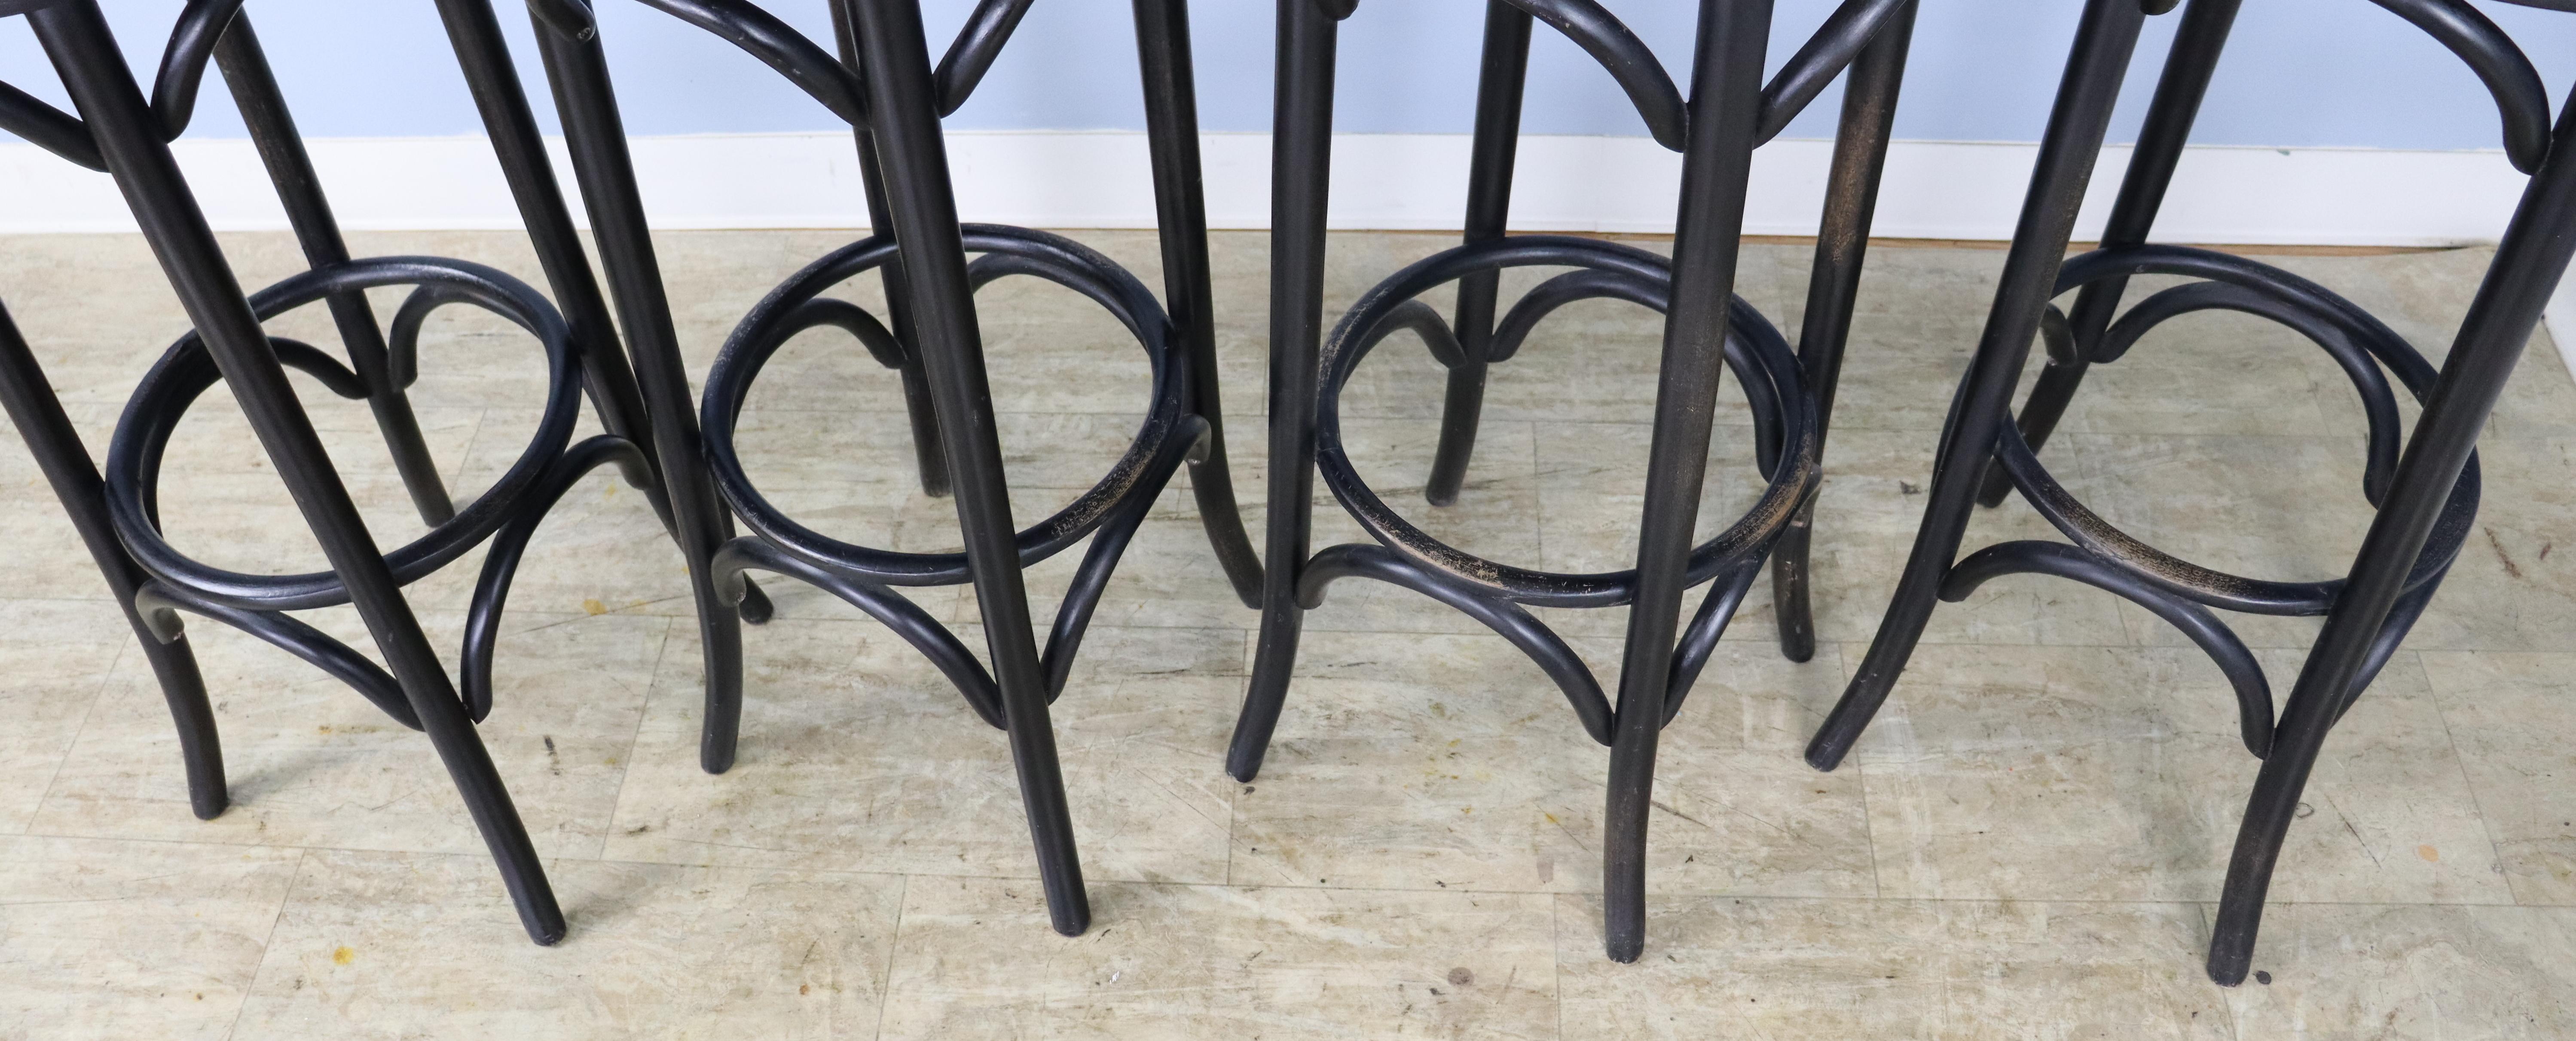 A set of four bent wood bar stools, ebonized and newly upholstered in an oatmeal linen.  The circular foot supports show wear, but we have left them in their original condition.  The stools are sturdy - no wobbles!  A repair has been made to one of